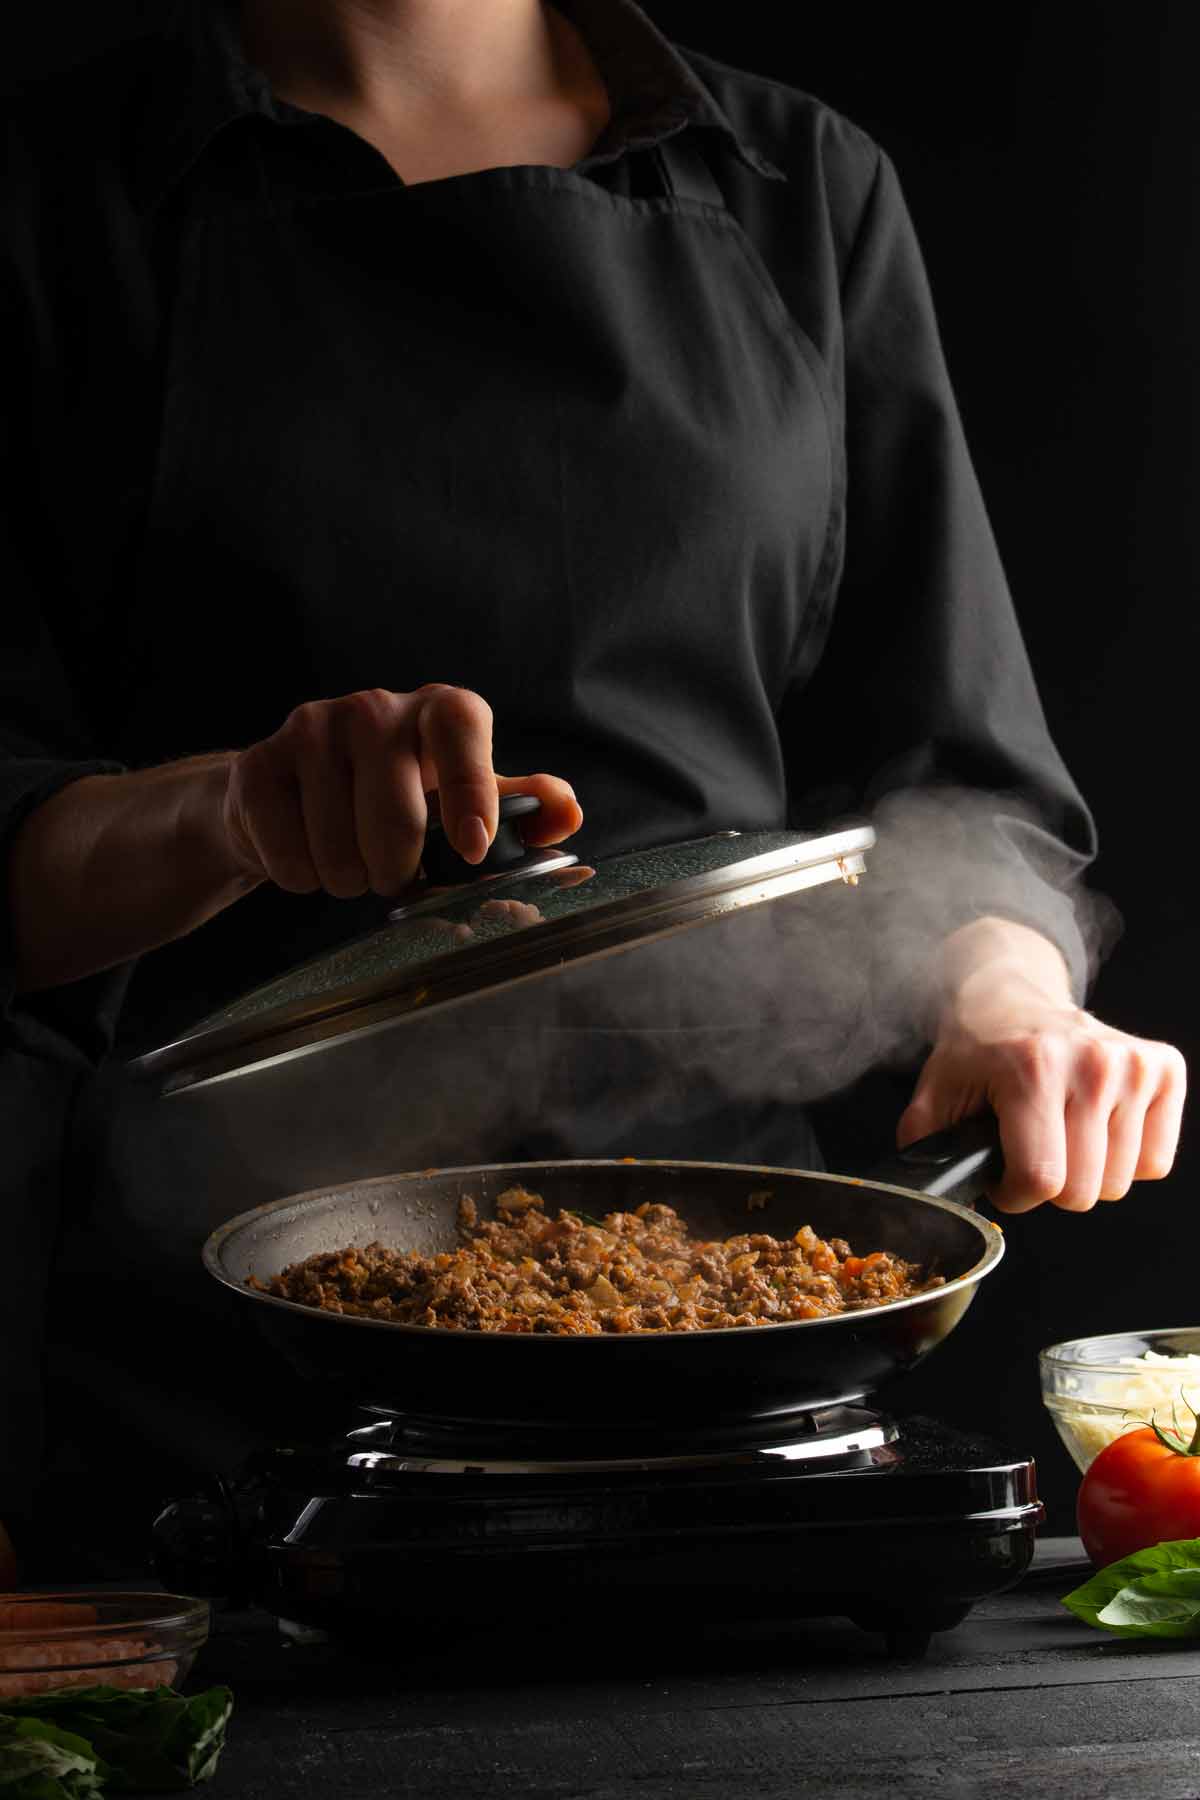 Woman reheating leftover sloppy joes in a skillet.